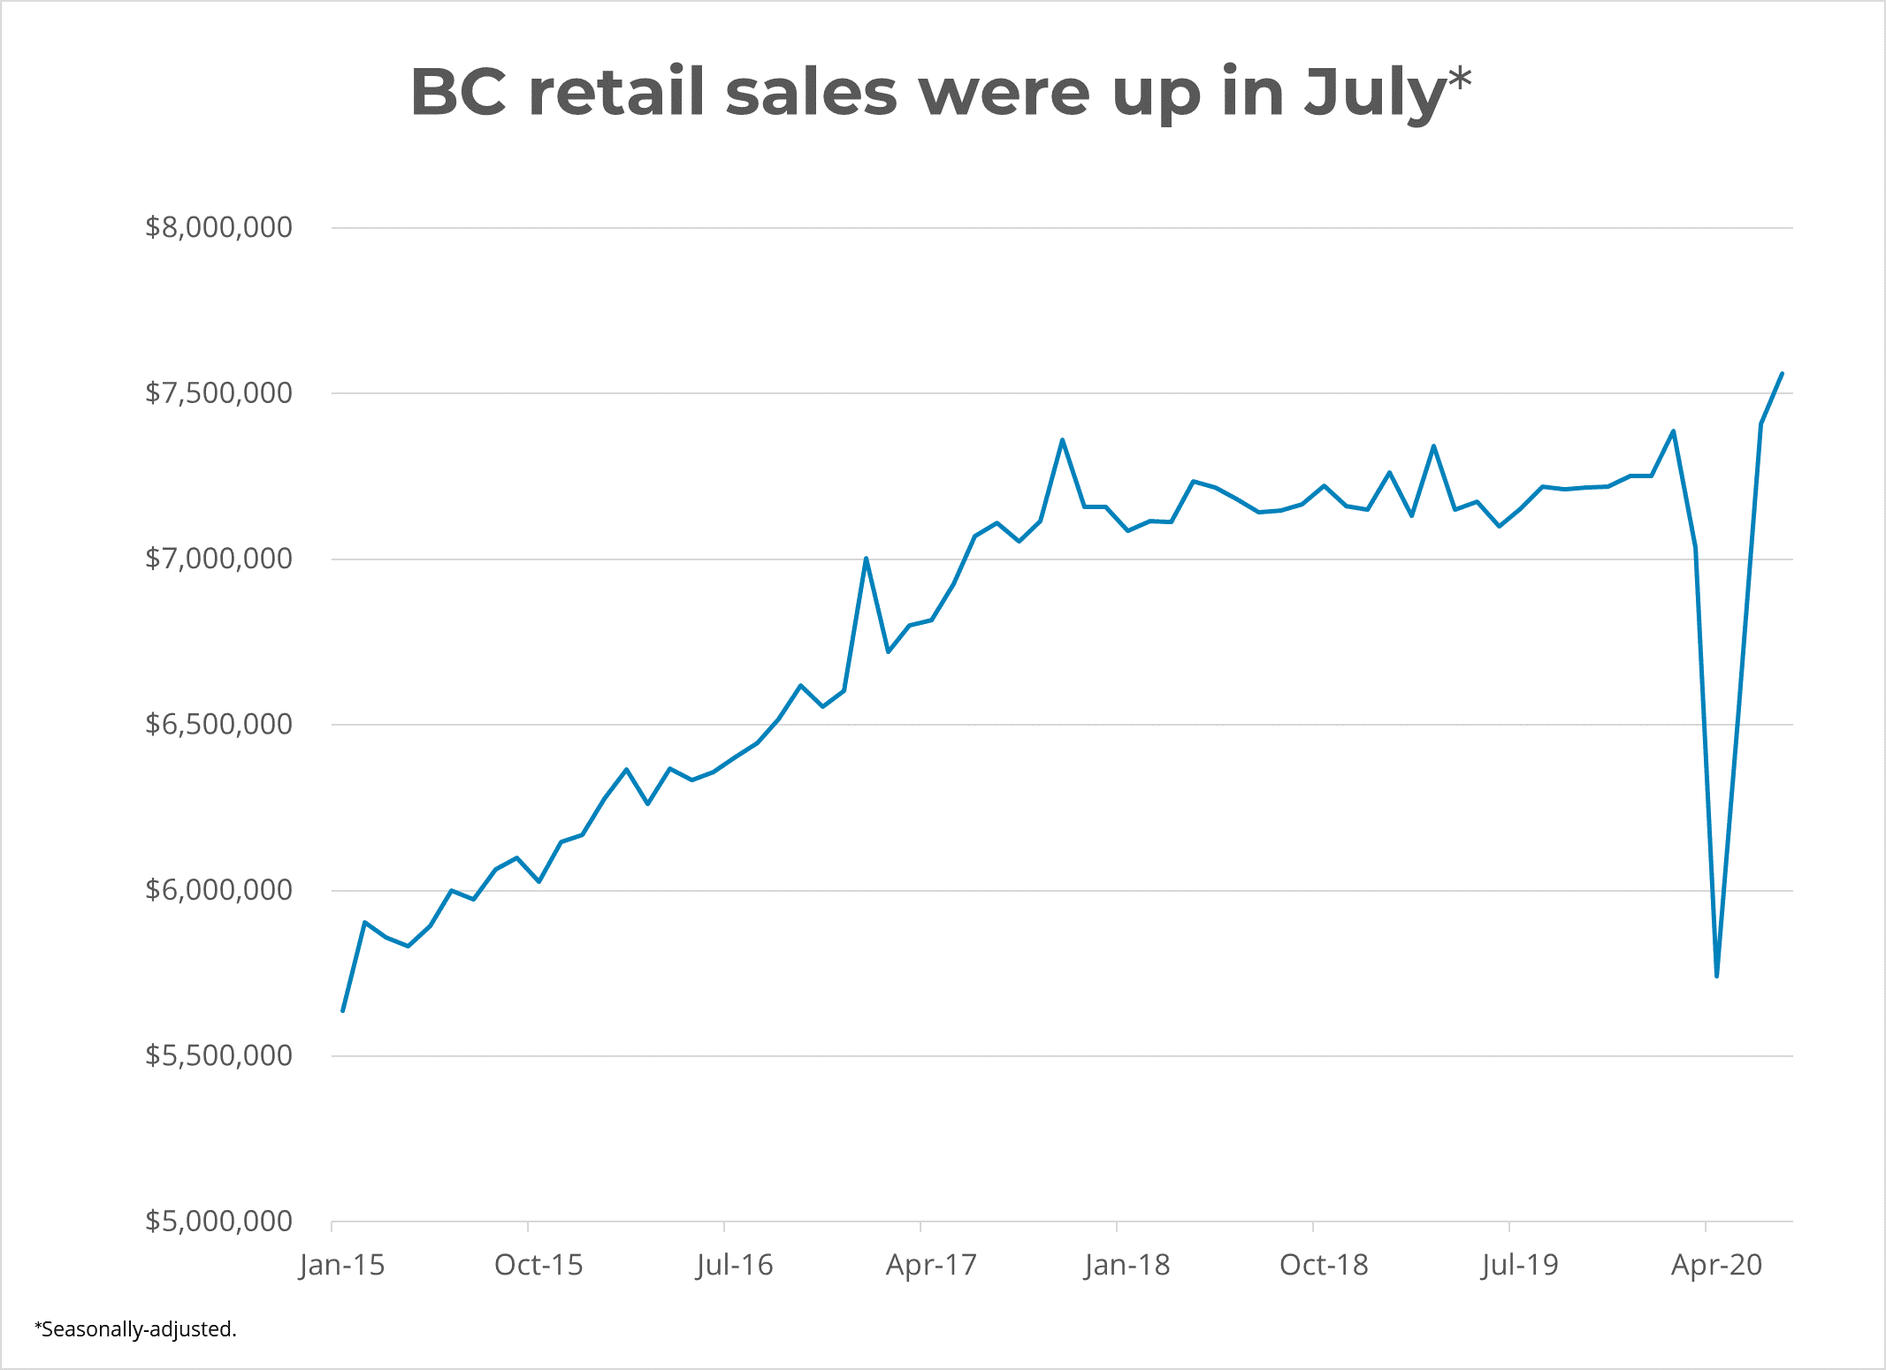 BC Retail Sales in July 2020